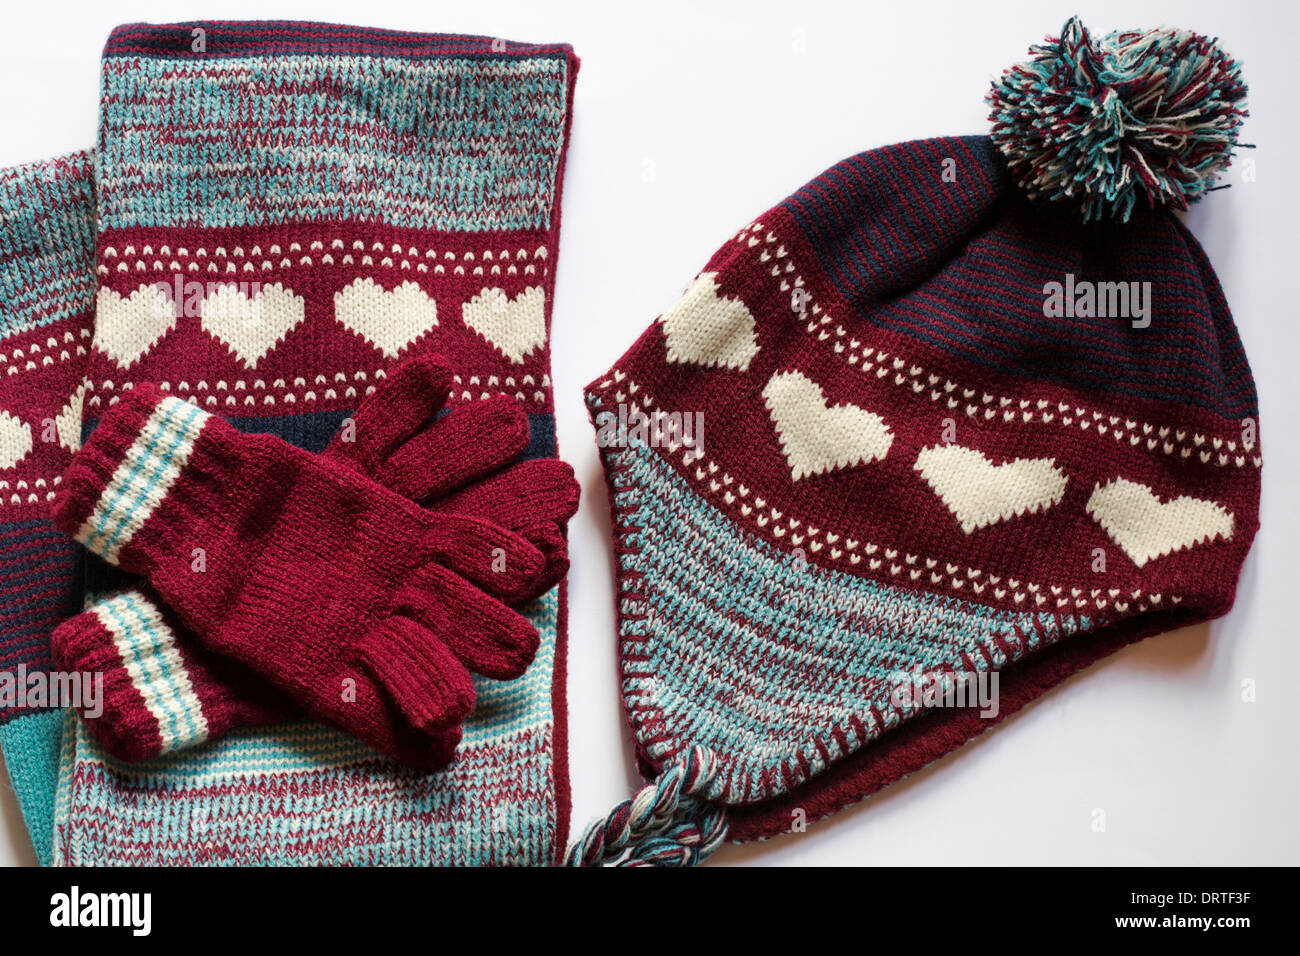 https://c8.alamy.com/comp/DRTF3F/hat-gloves-and-scarf-set-with-hearts-on-set-on-white-background-DRTF3F.jpg